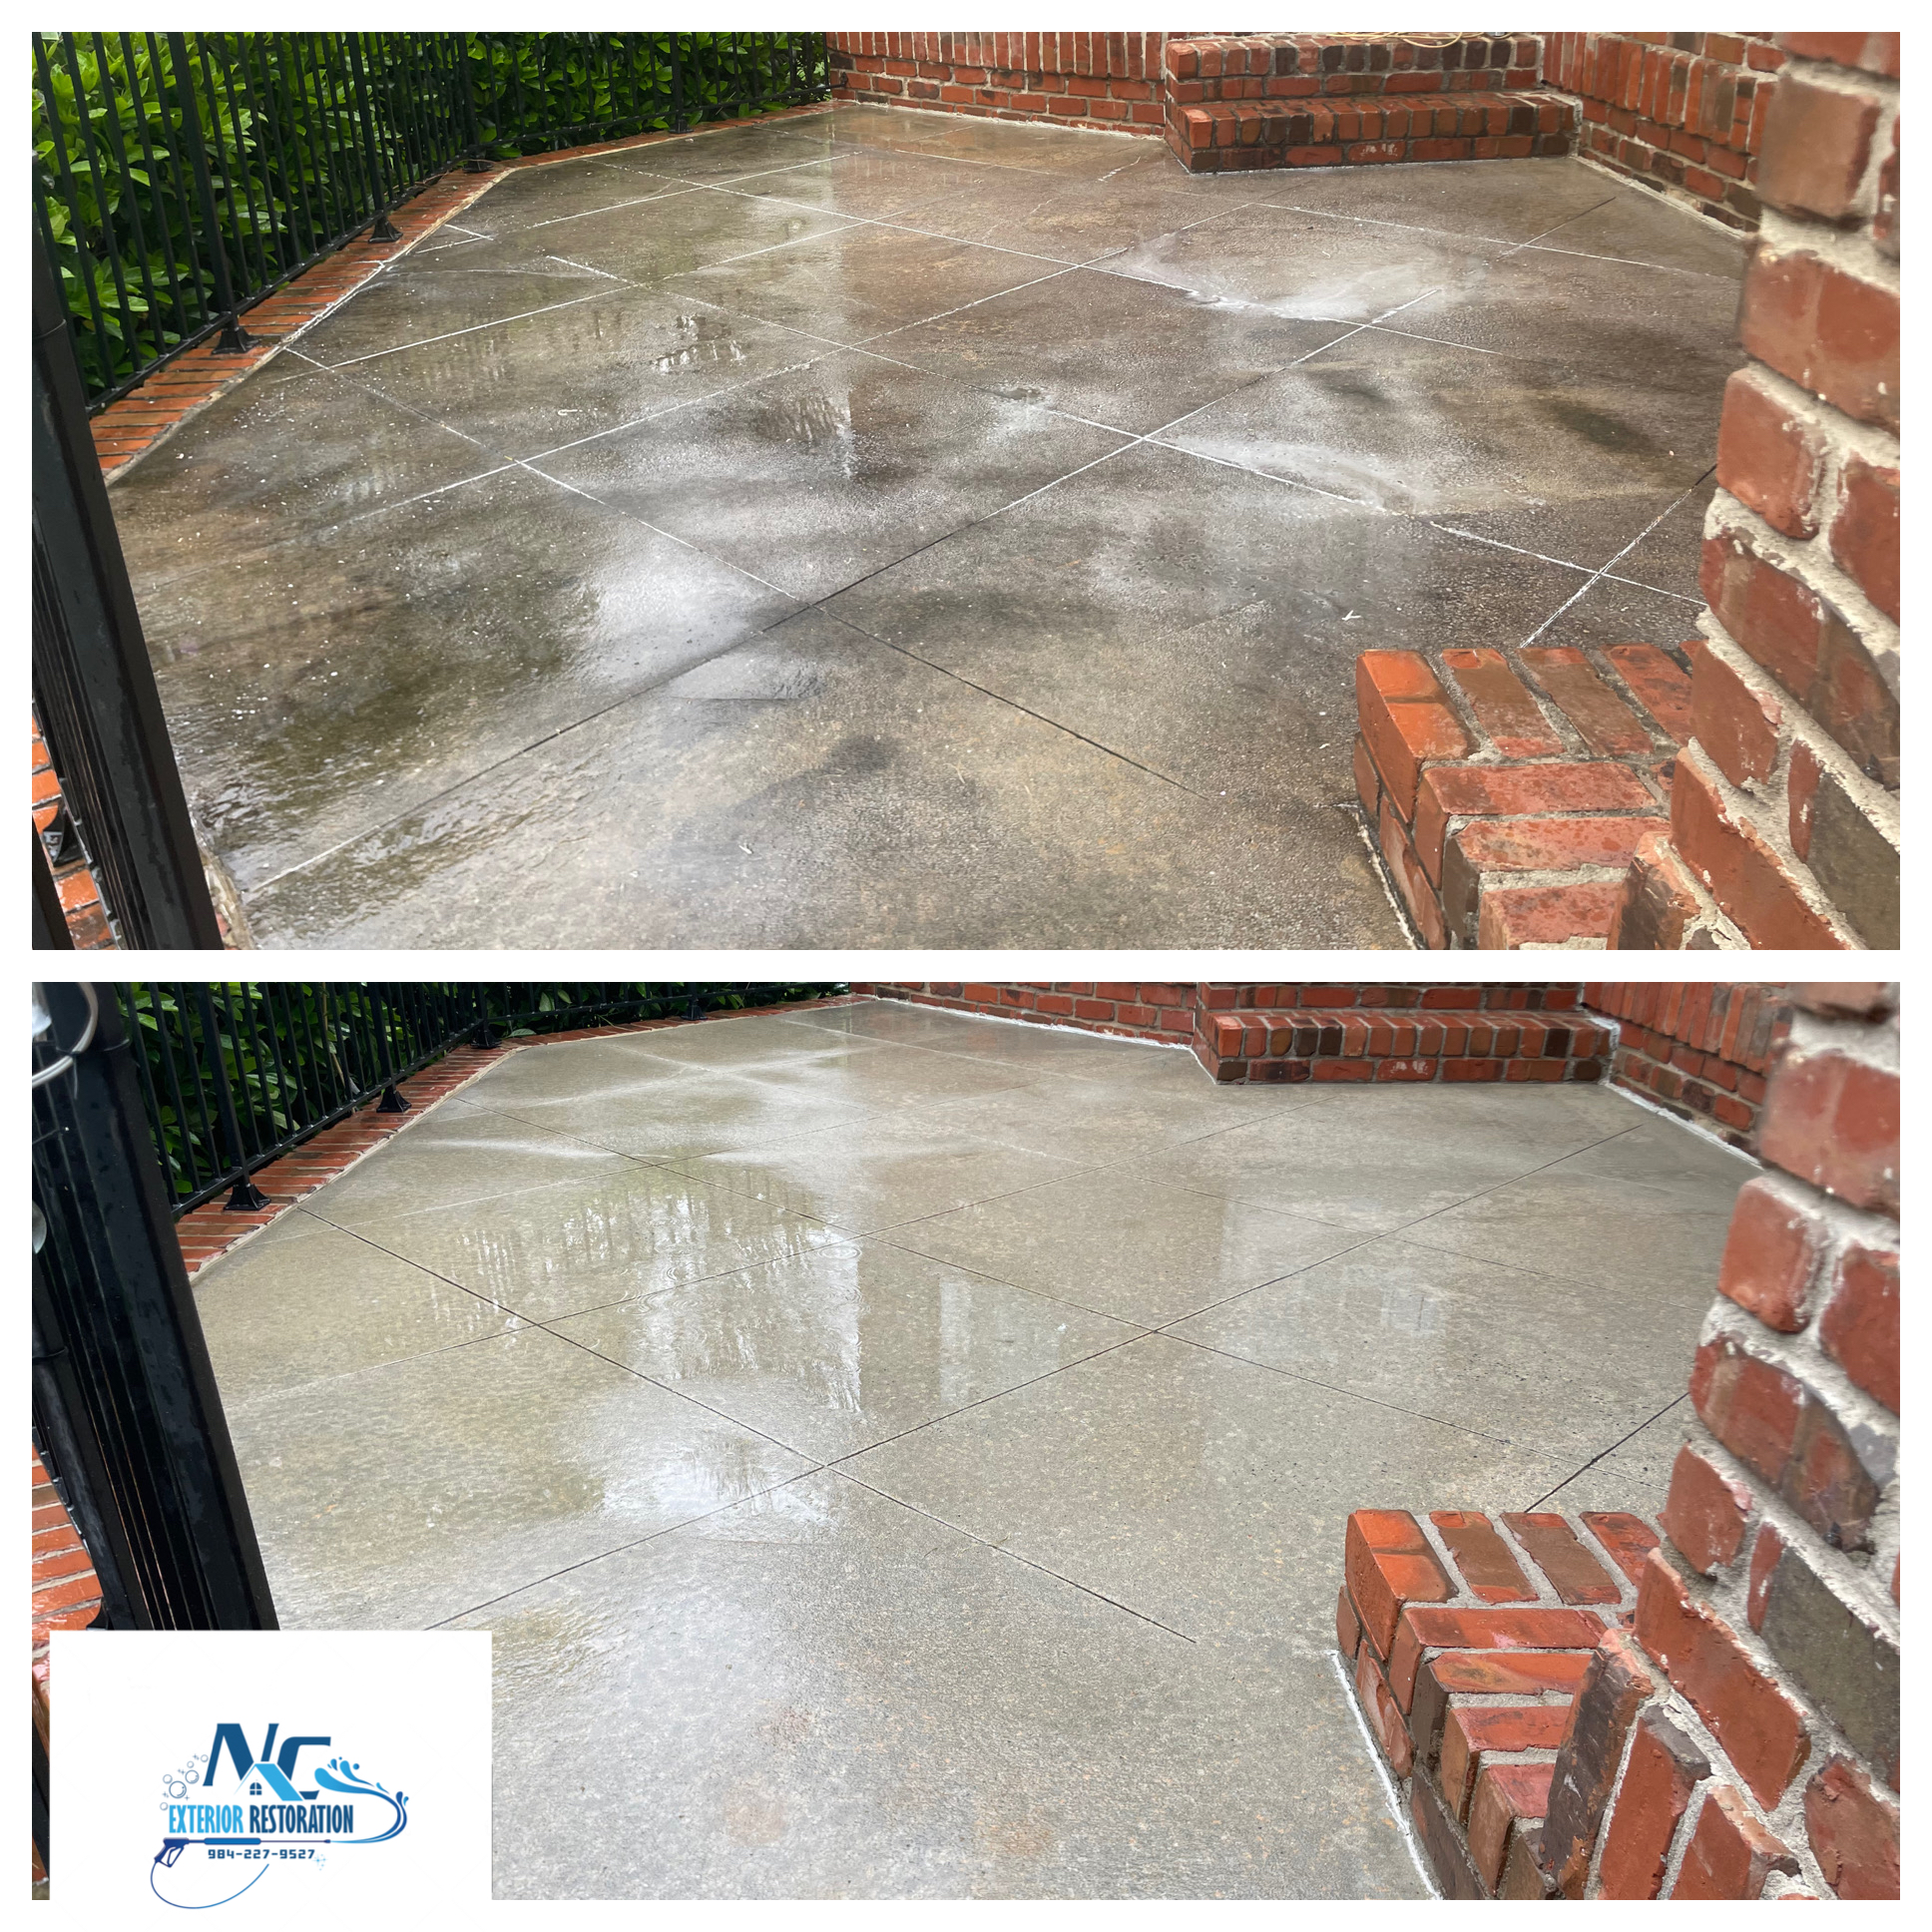 Top Quality Driveway and Patio Cleaning in Mebane, NC